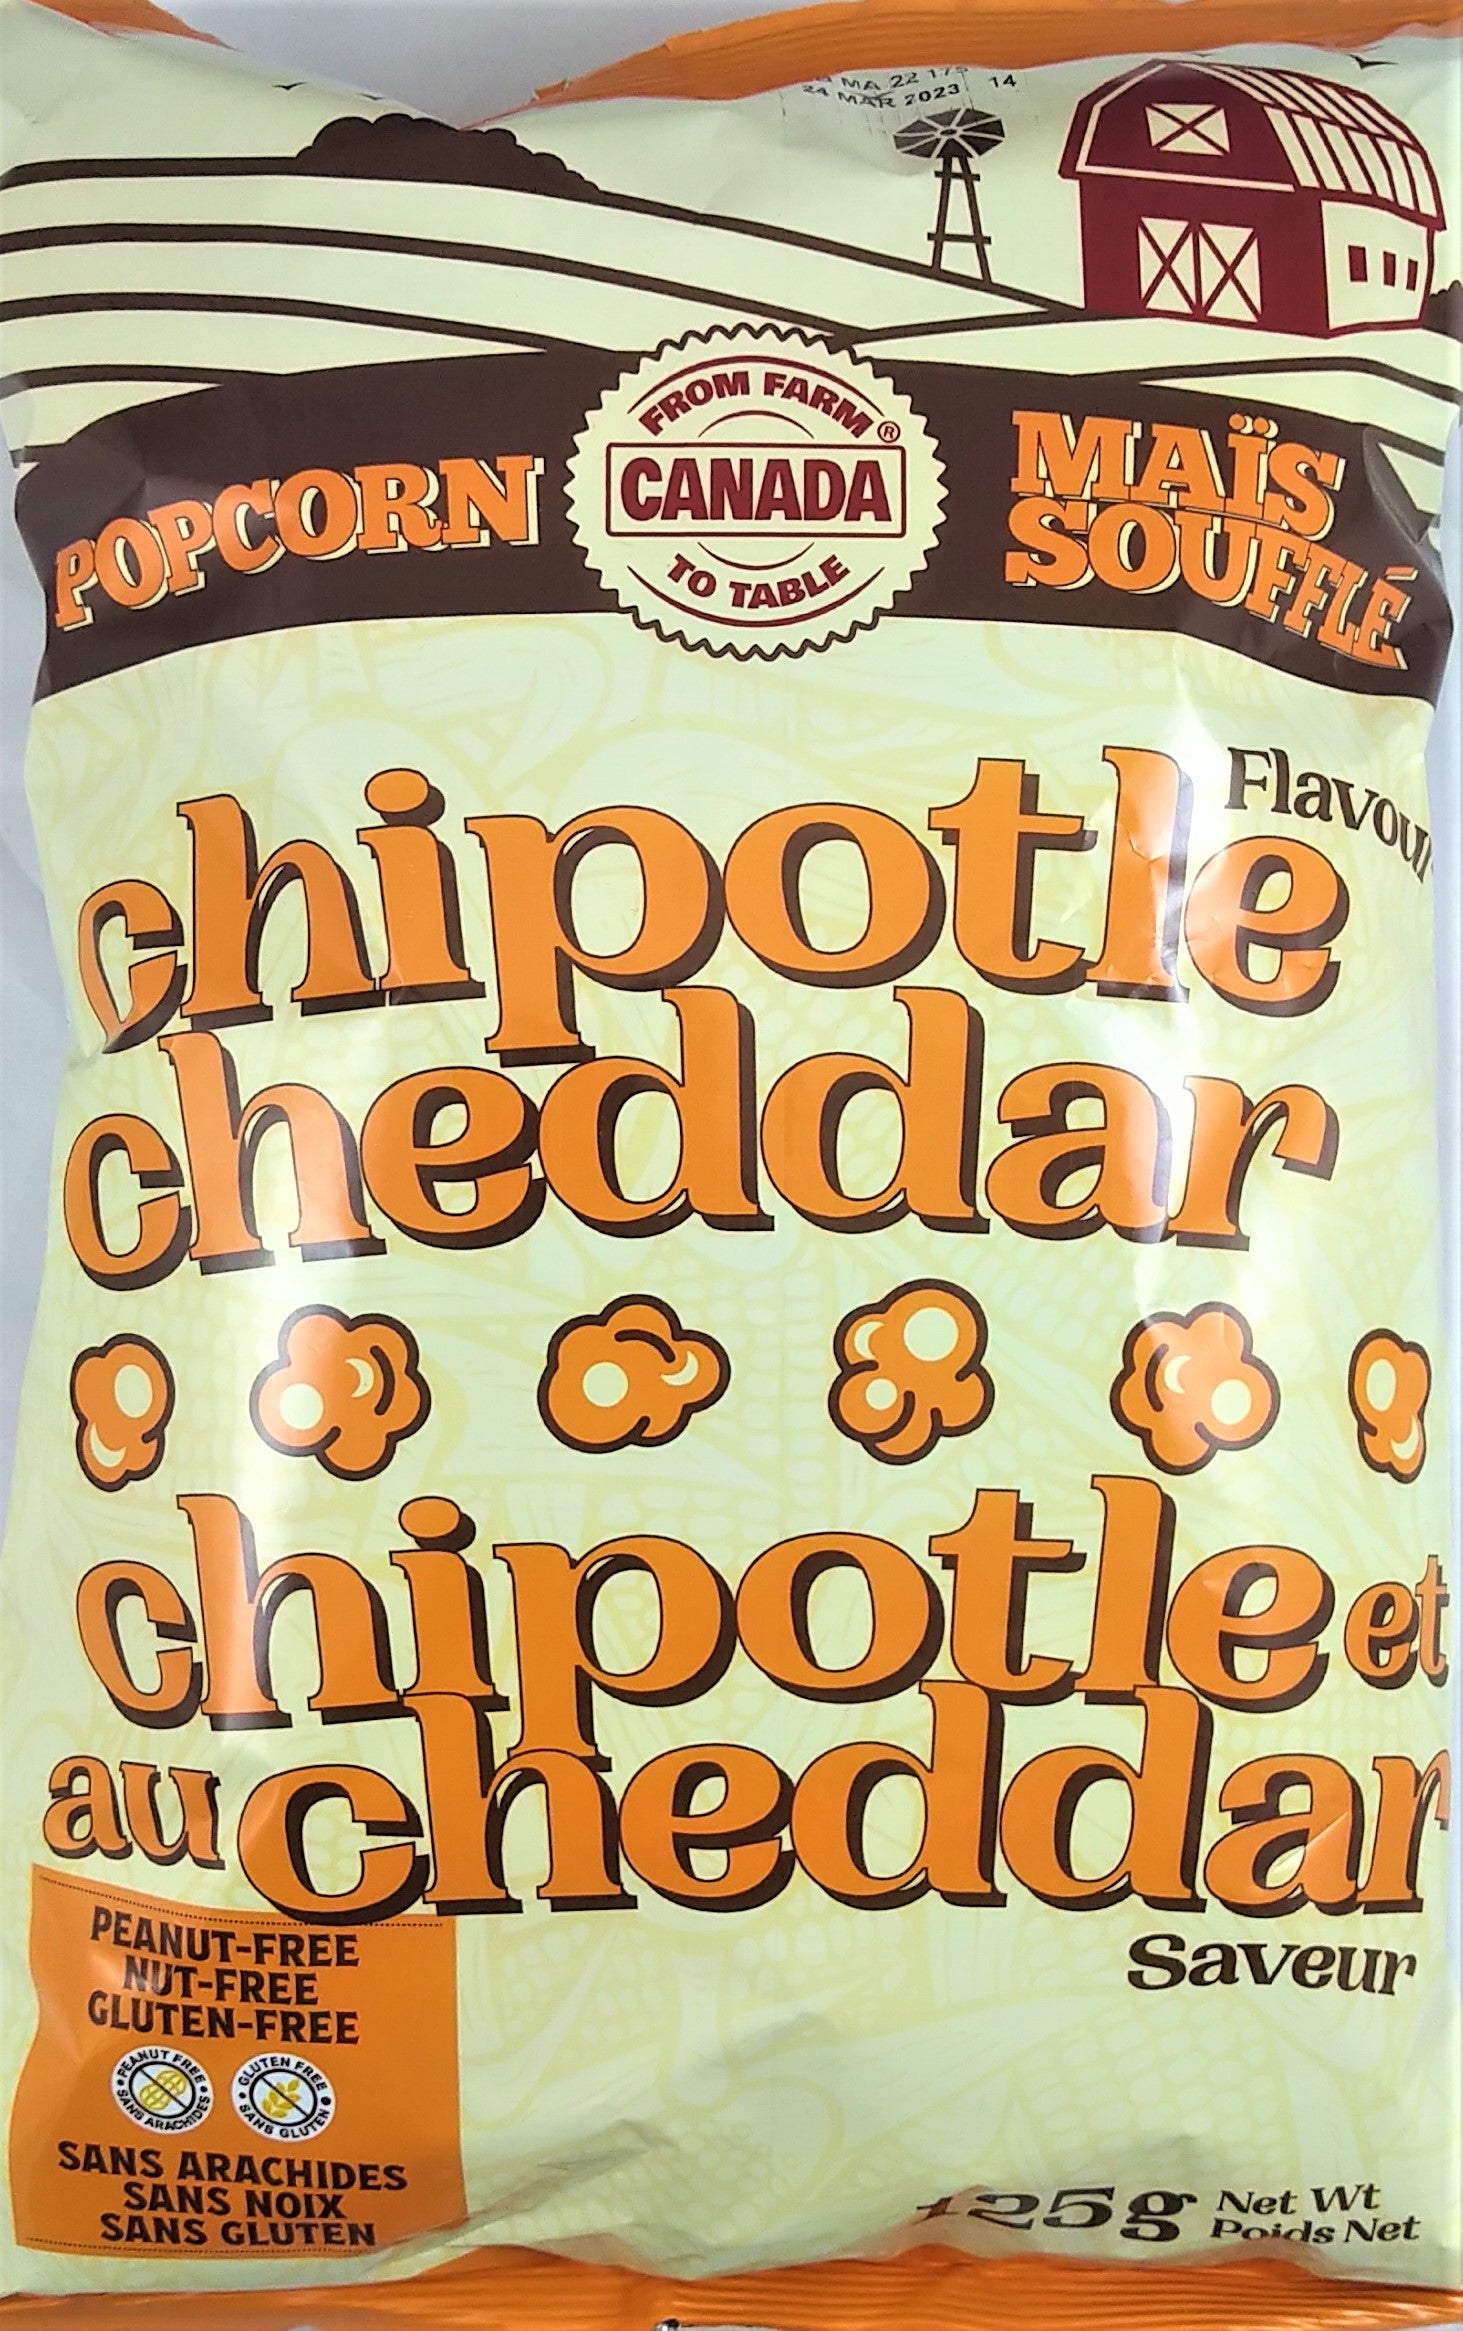 From Farm to Table Popcorn Chipotle Cheddar 12/125g